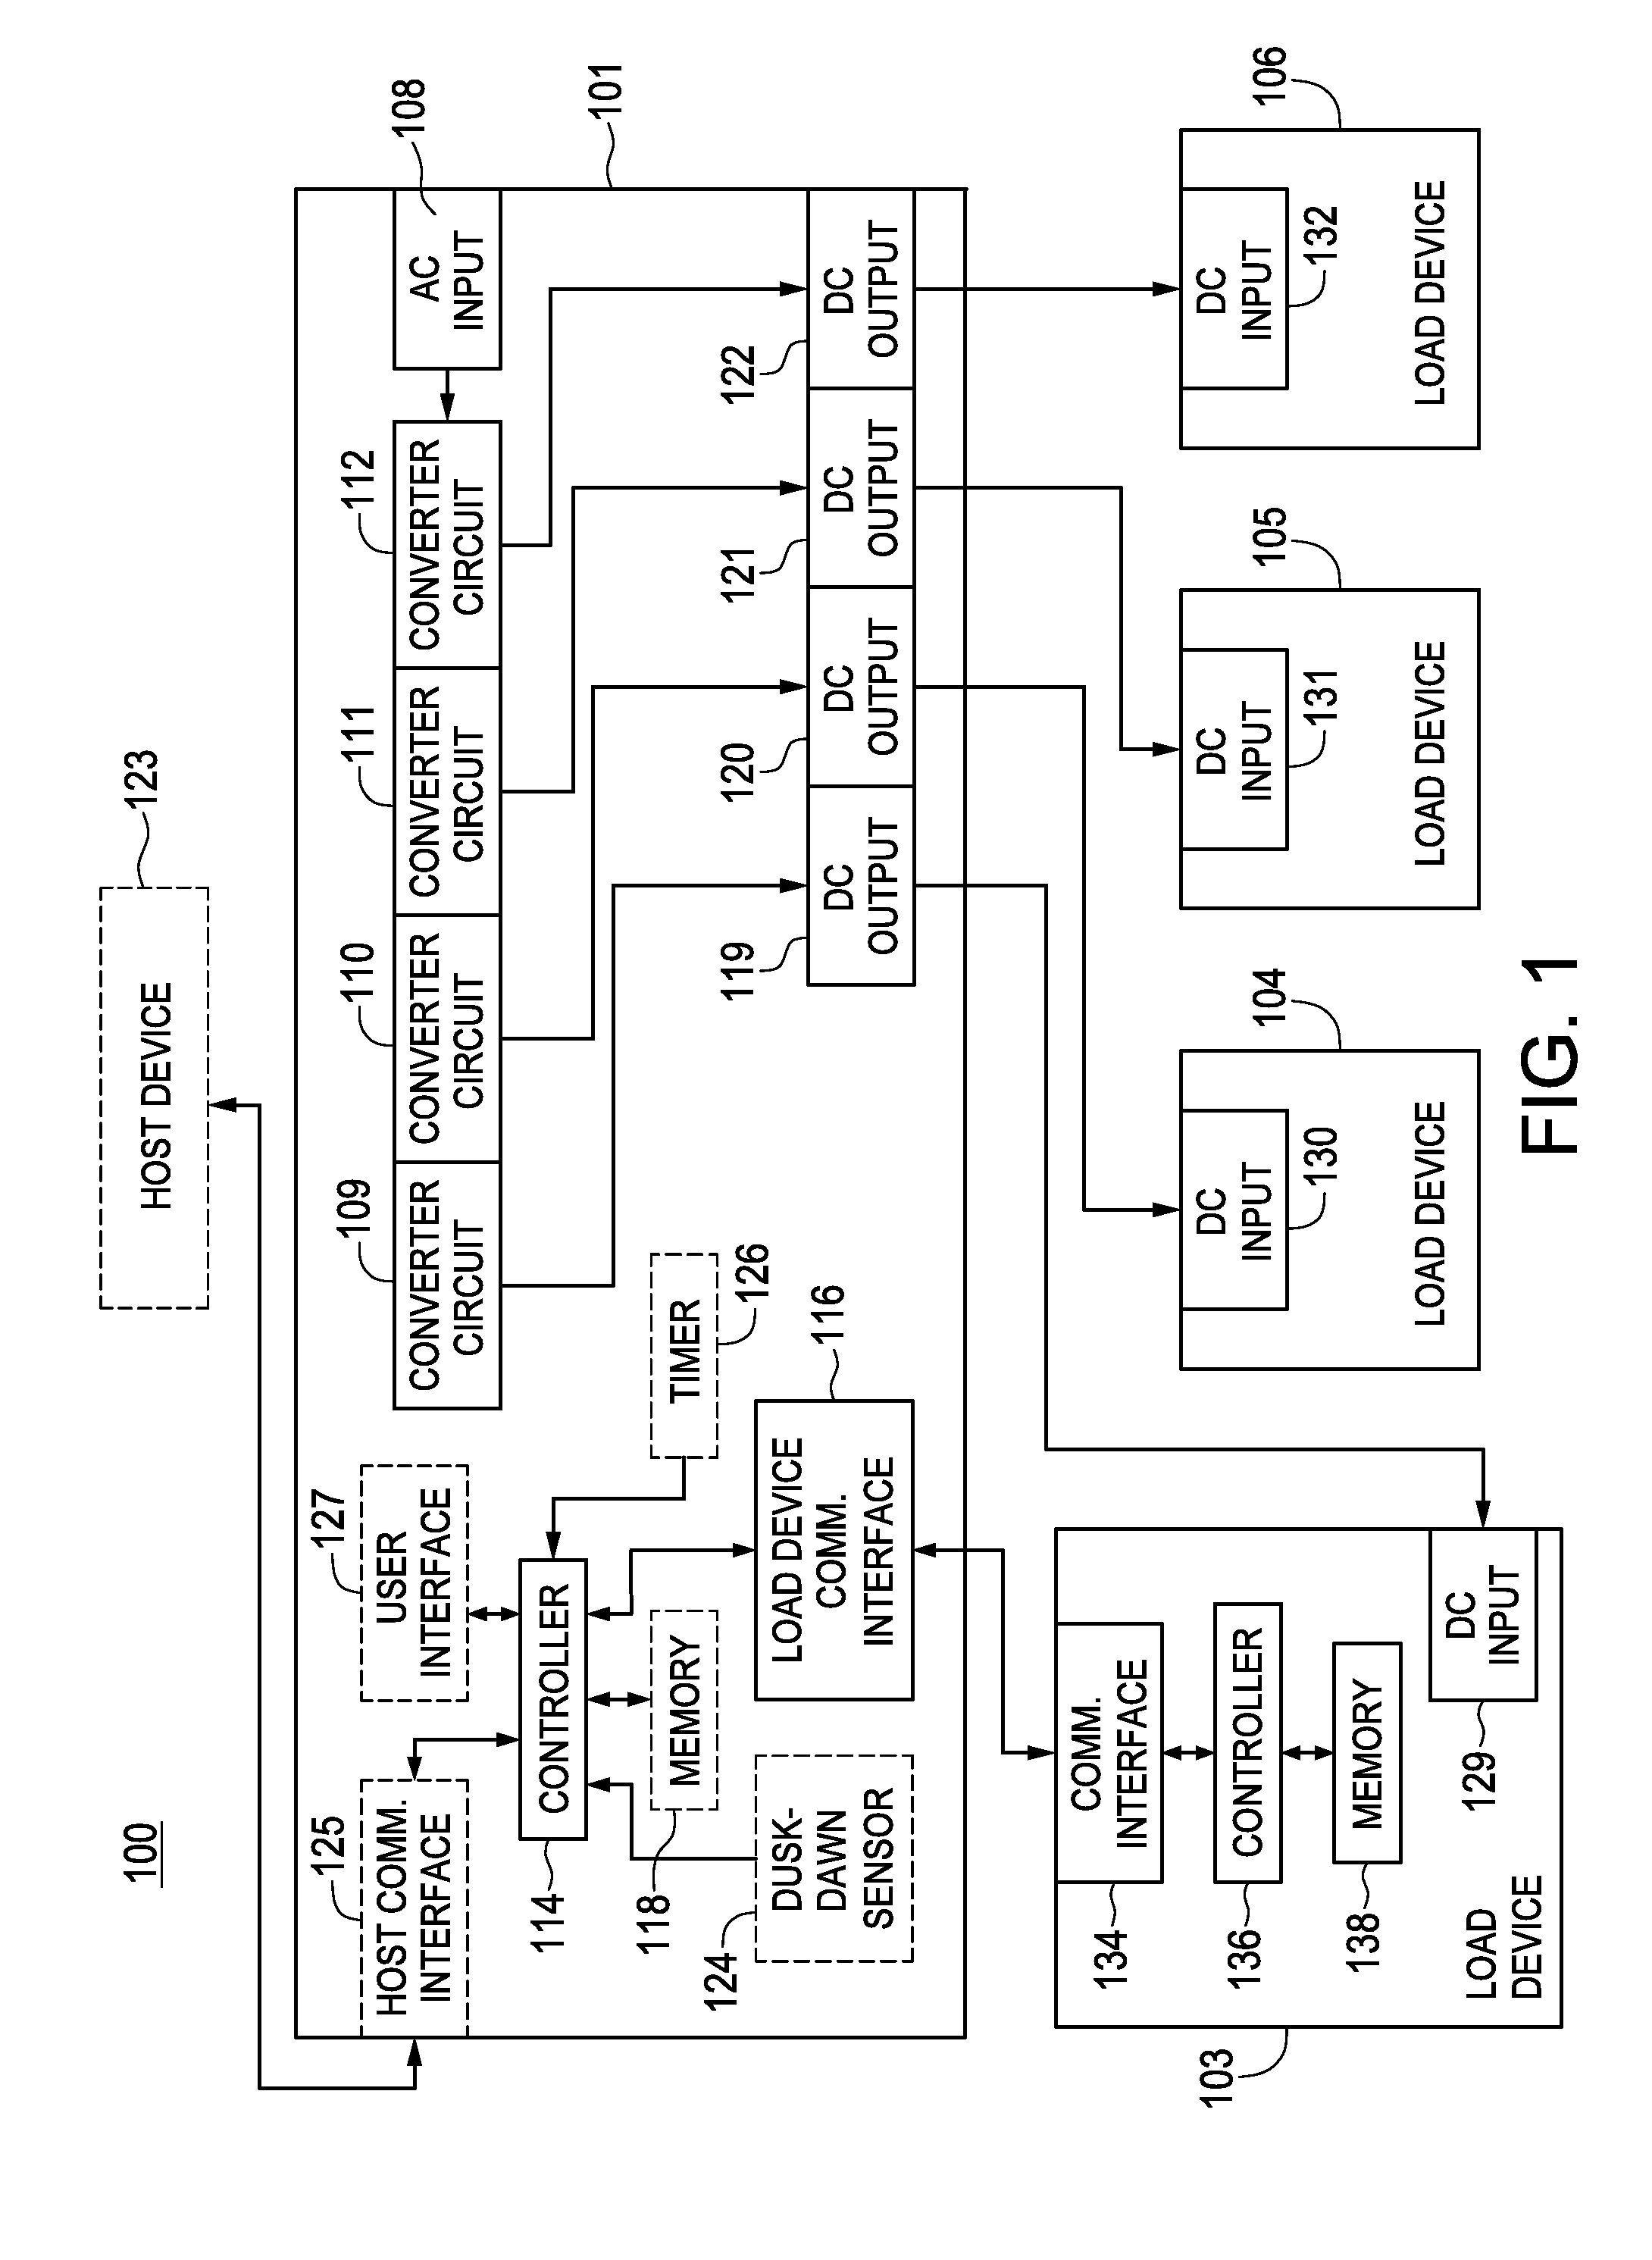 Apparatus and method for controlling and supplying power to electrical devices in high risk environments